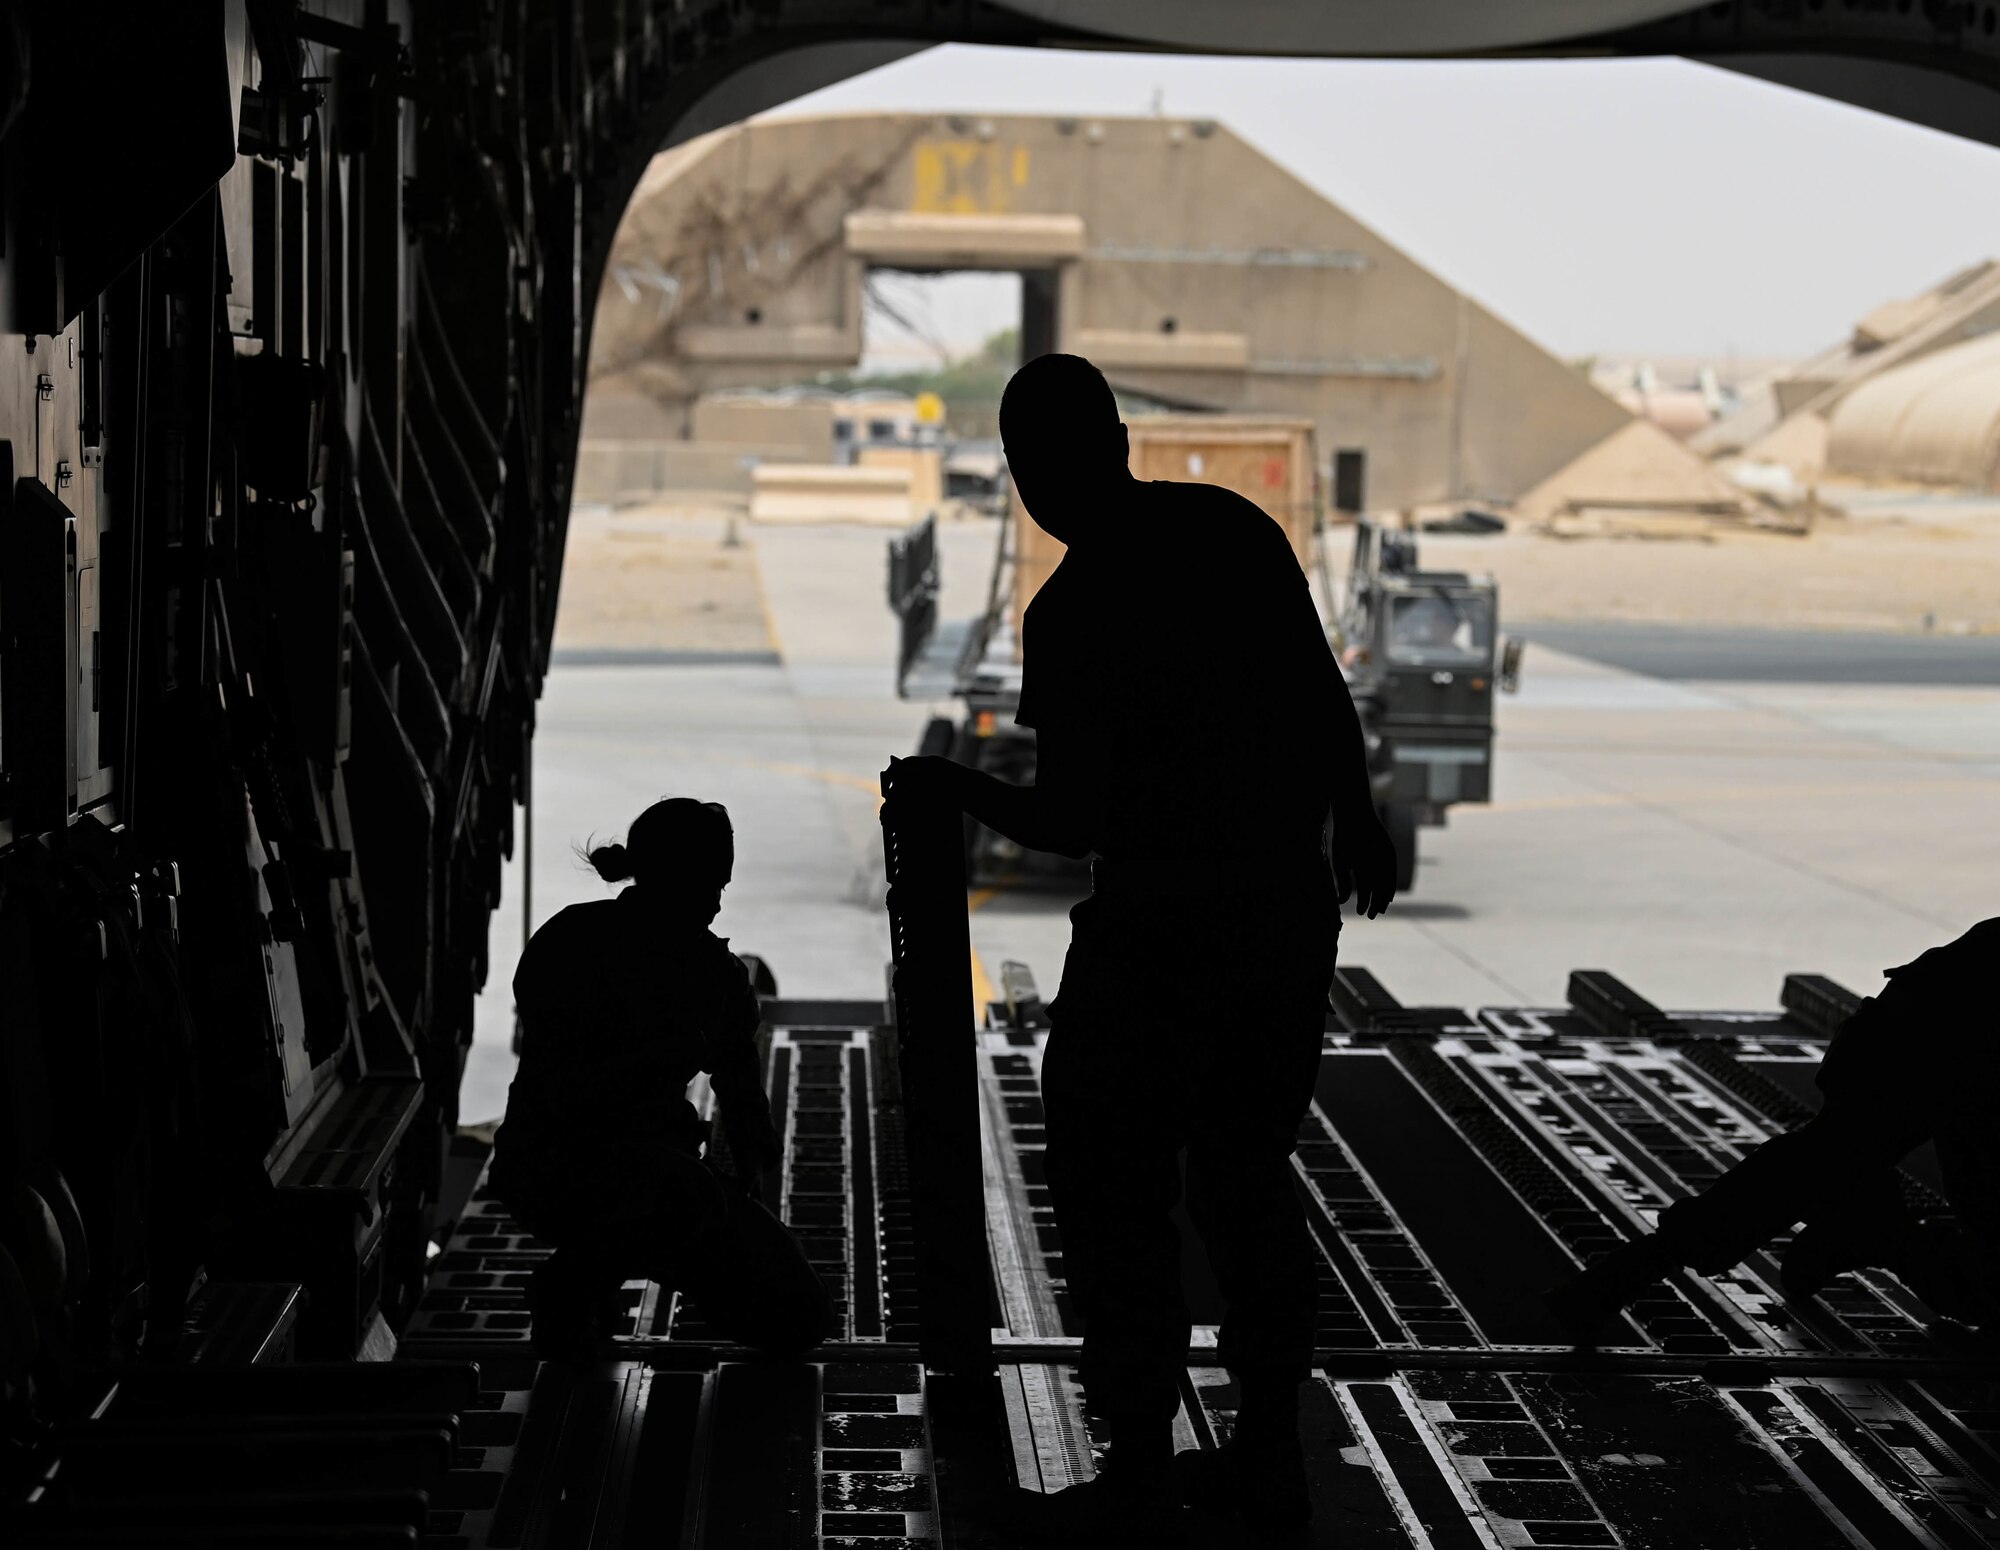 Airmen from the 386th Expeditionary Logistics Readiness Squadron prepare to load cargo onto a C-17 Globemaster aircraft assigned to Al Udeid Airbase Qatar, July 12, 2022 at Ali Al Salem Air Base, Kuwait. The 386th ELRS airmen worked with C-17 loadmasters to load cargo aboard the aircraft. (U.S. Air National Guard photo by Tech. Sgt. Michael J. Kelly)